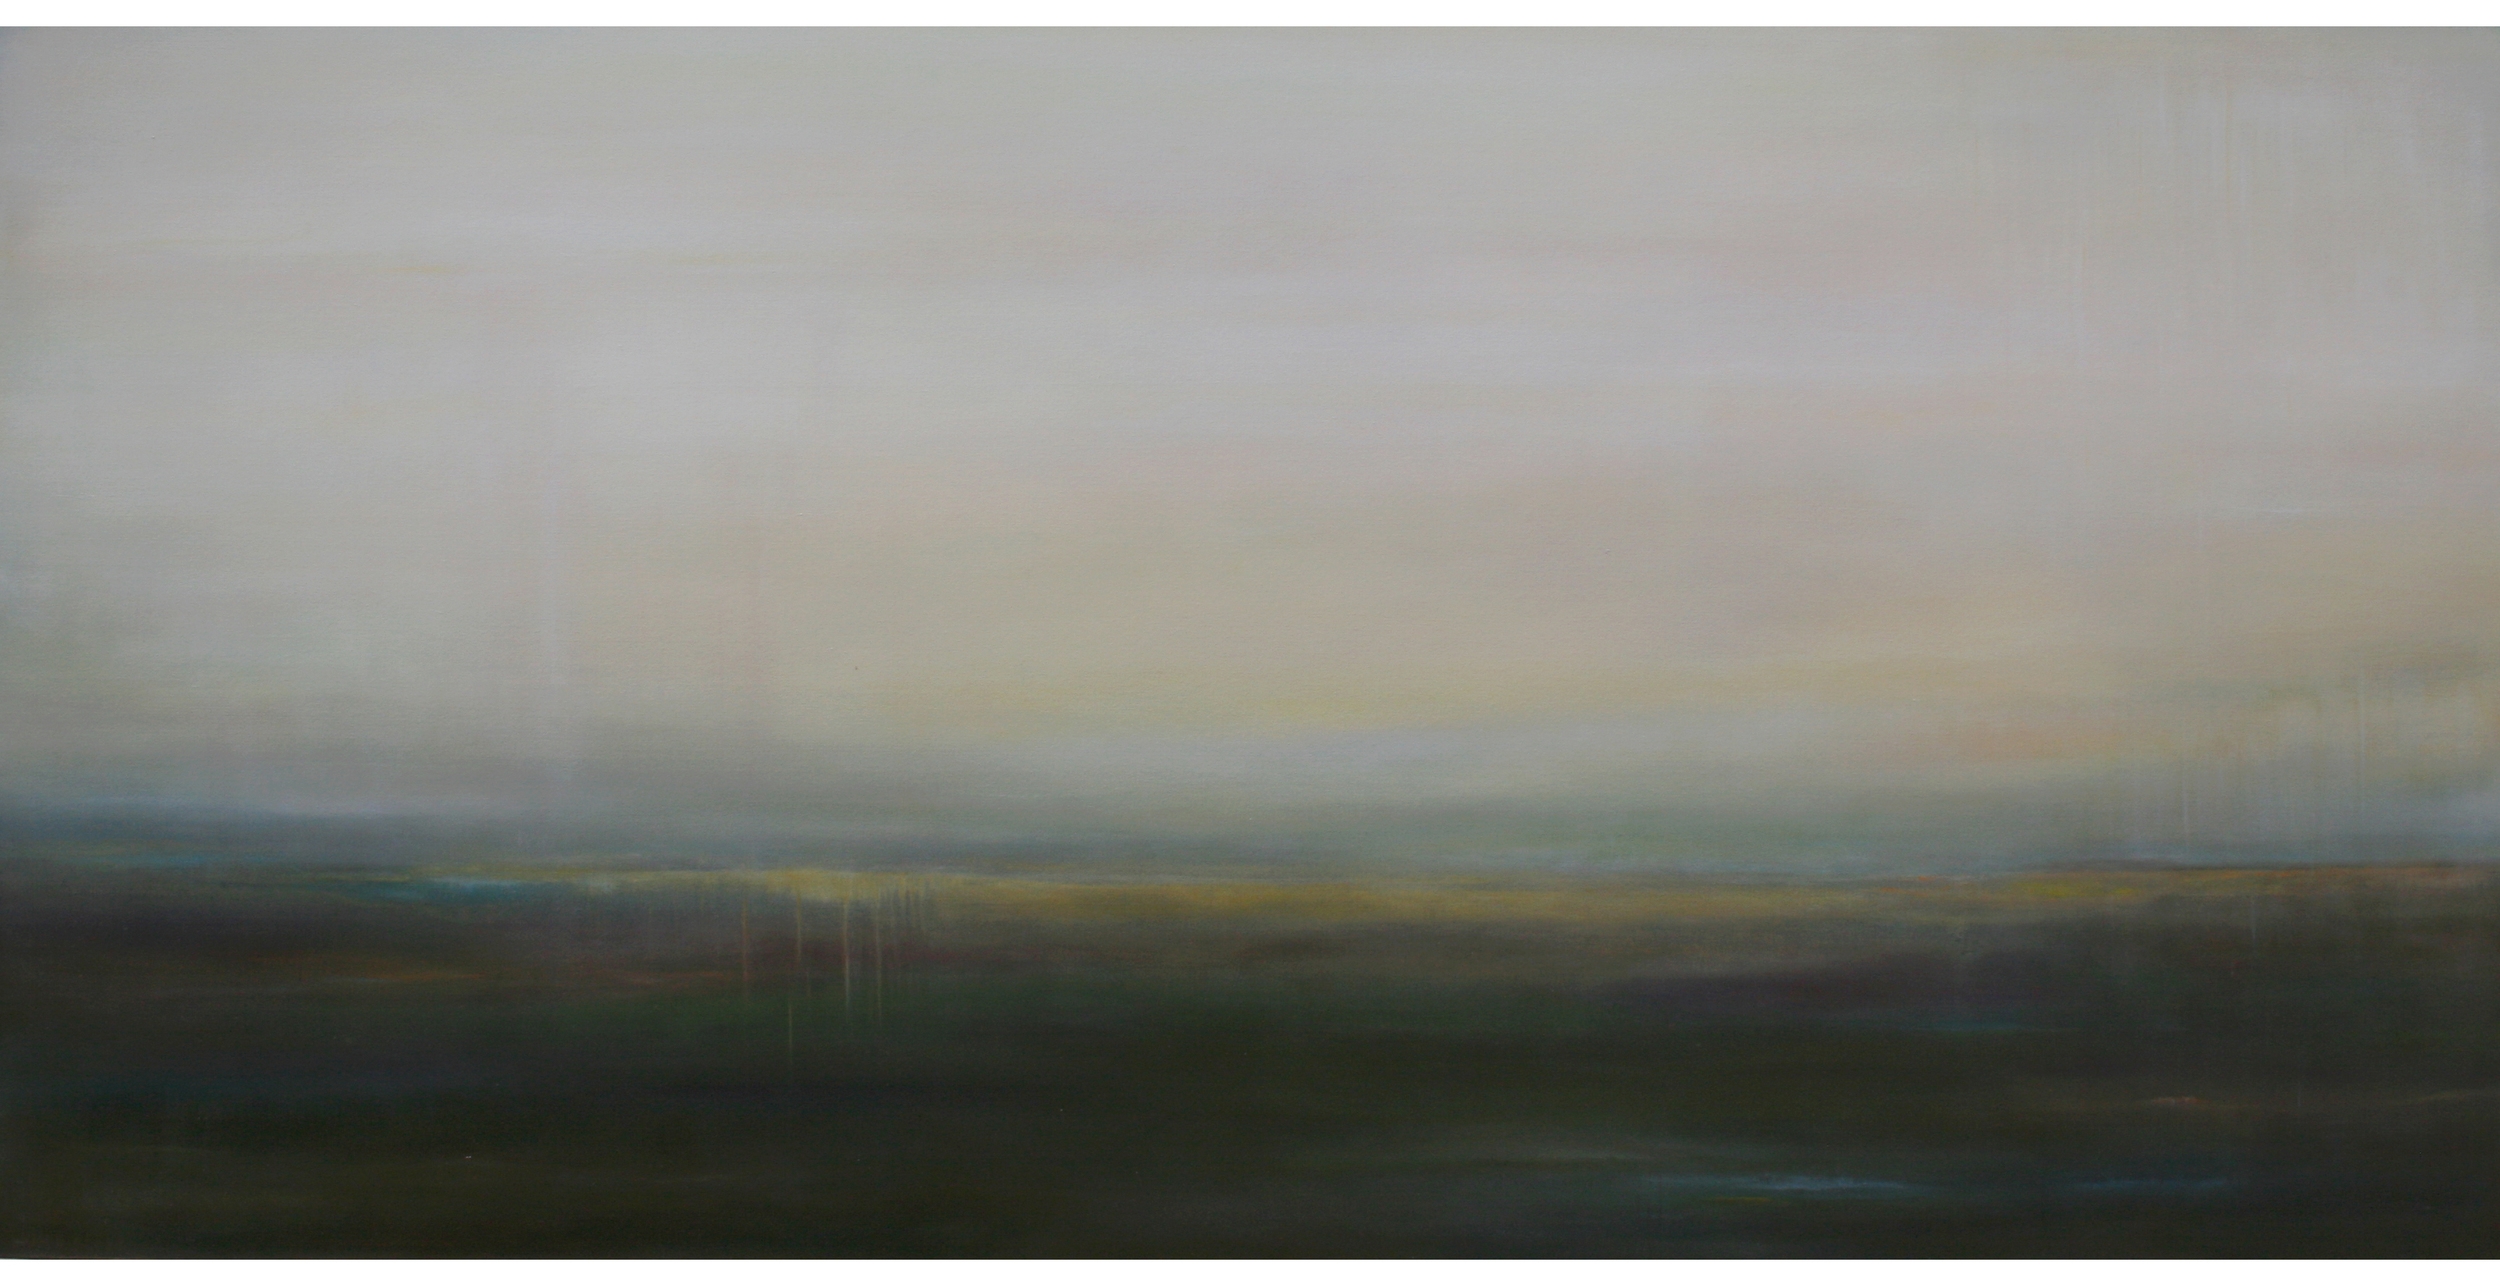 The Firmament, 60 x 120 inches, oil on canvas